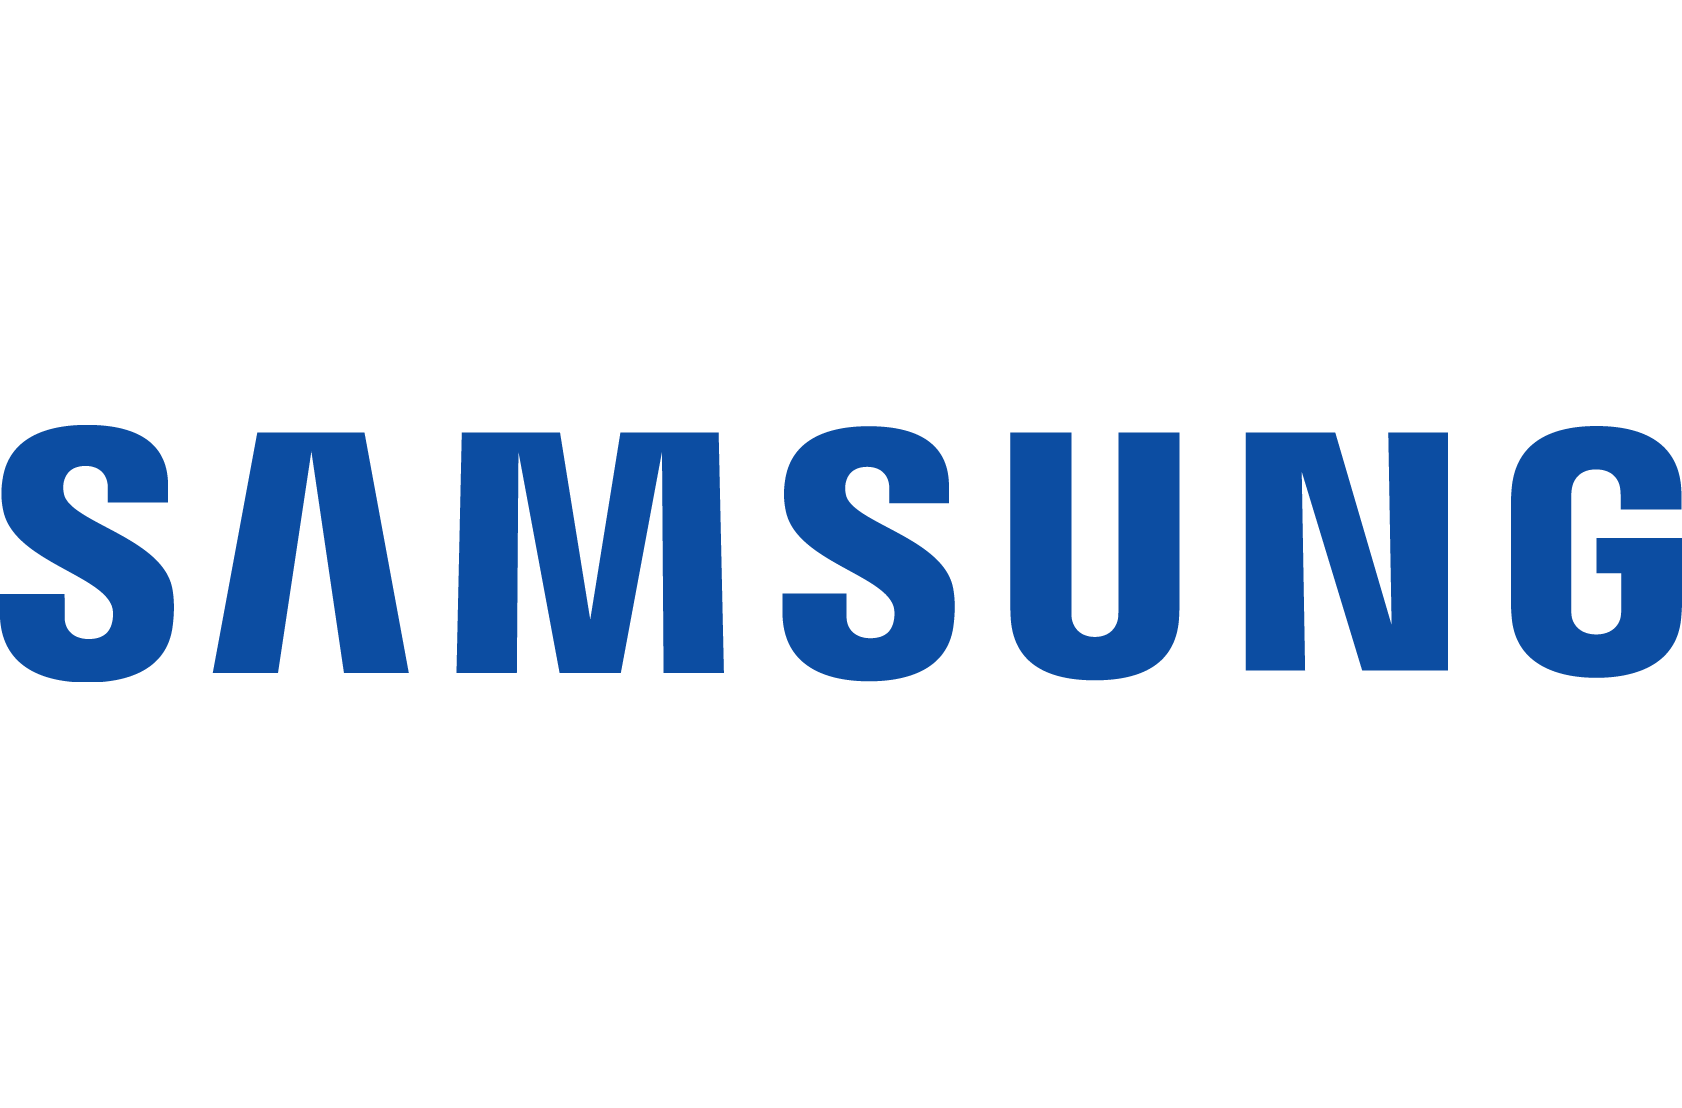 https://openconnectivity.org/wp-content/uploads/2015/09/samsung-logo-4.png